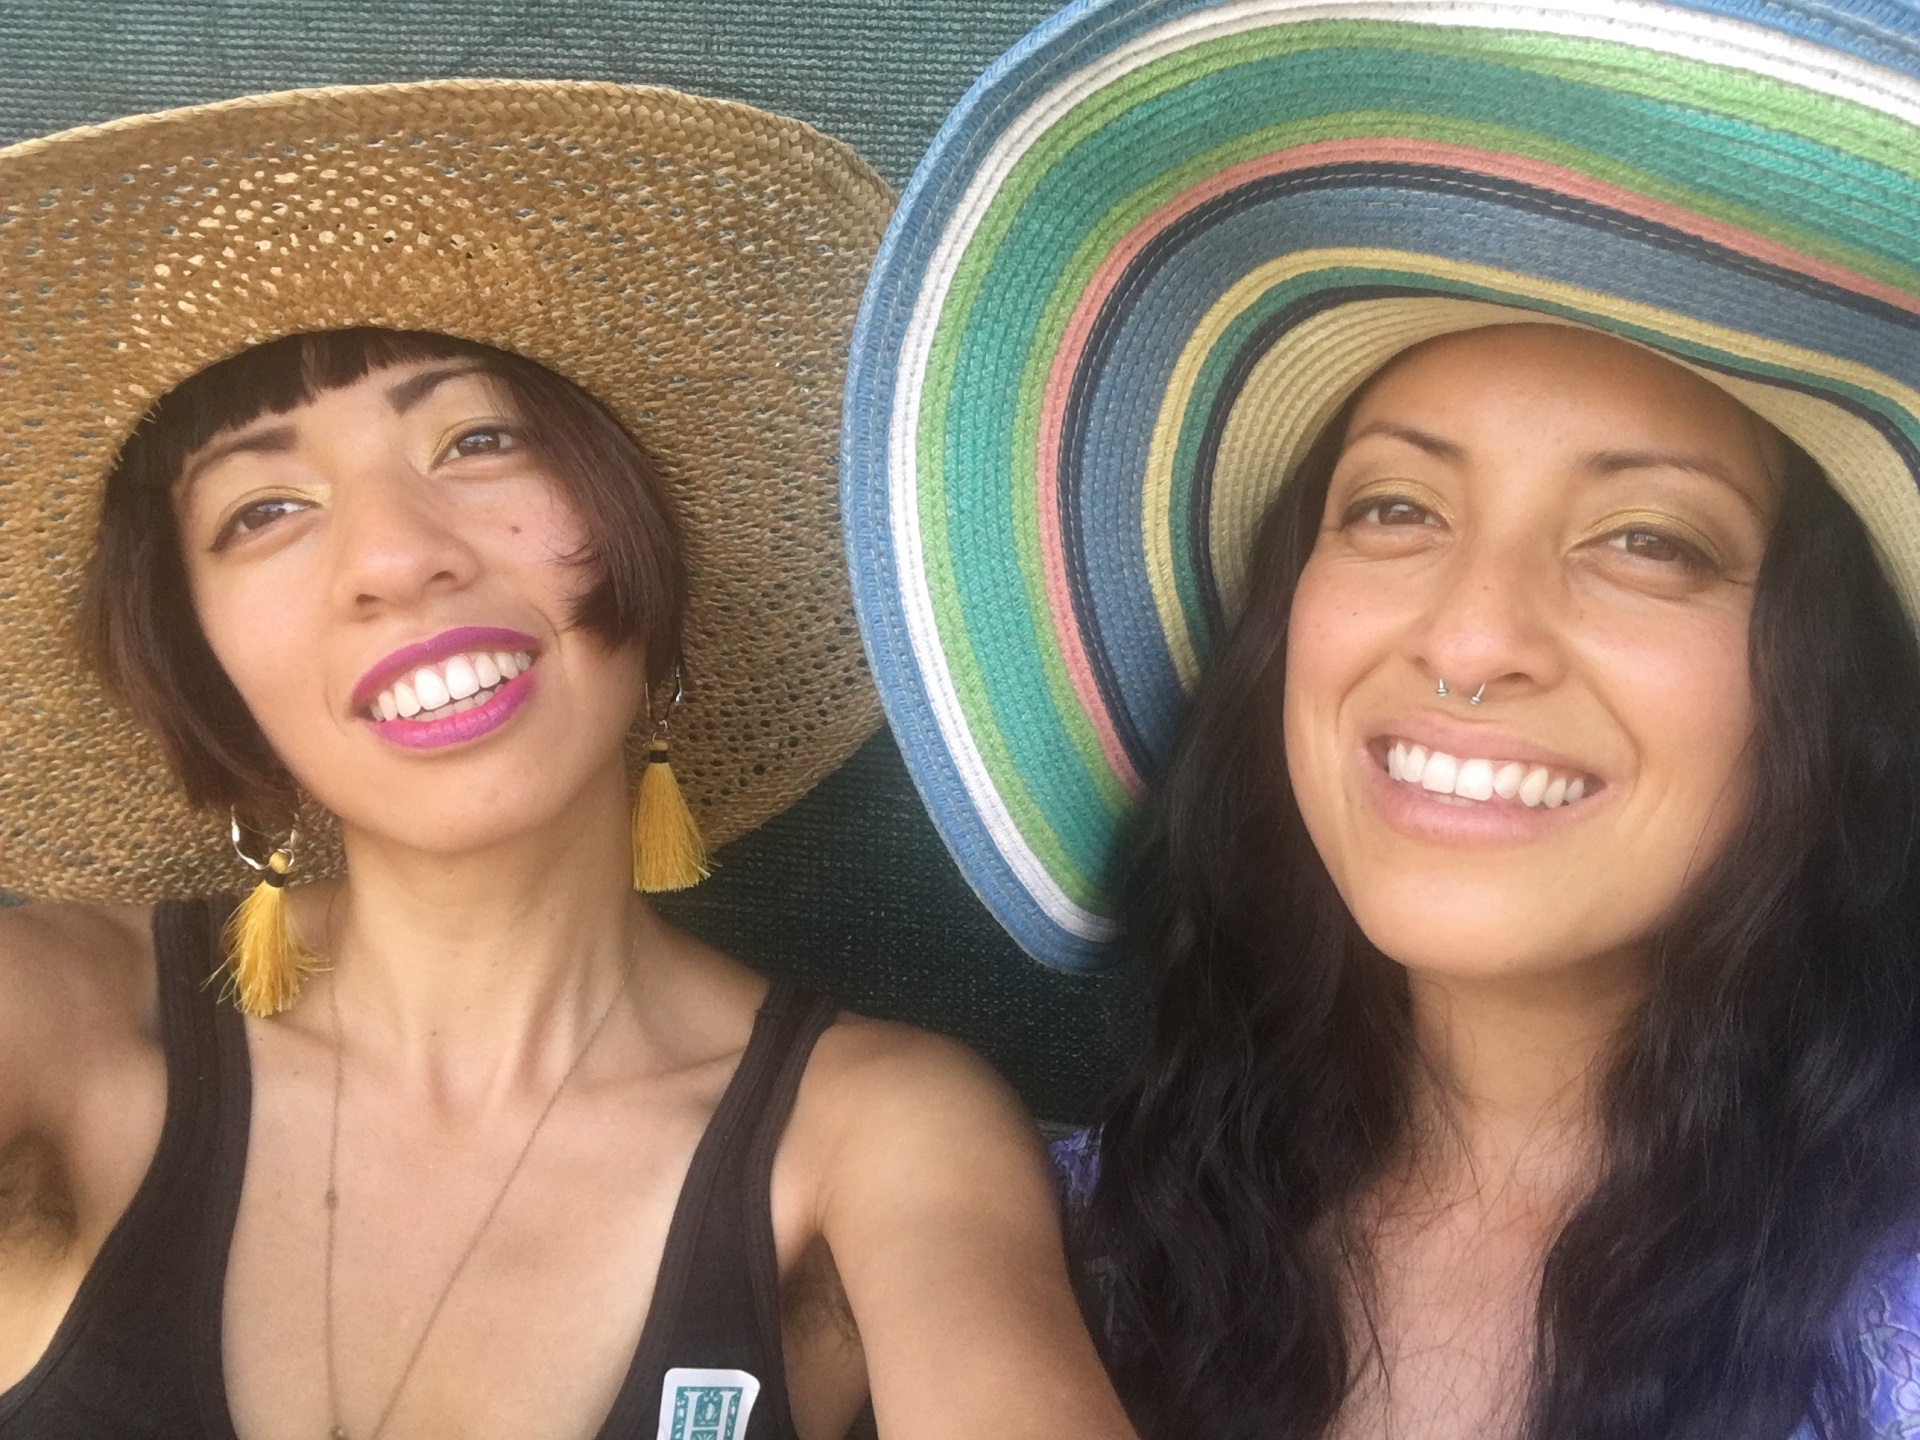 Two sisters wear large, straw sun hats and smile for the camera.